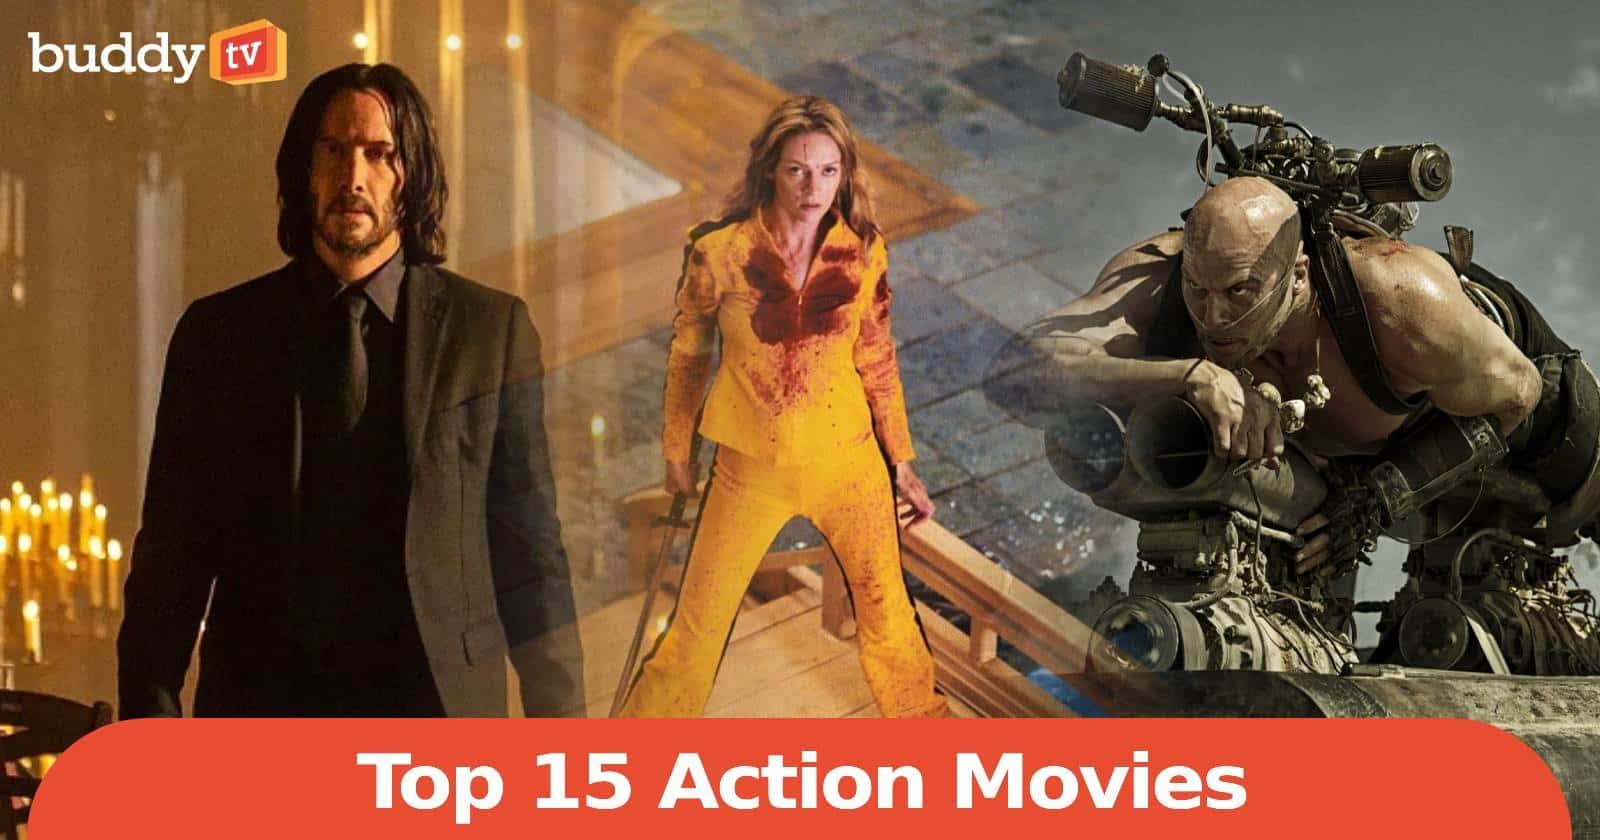 Top 15 Action Movies That Made a Lasting Impact